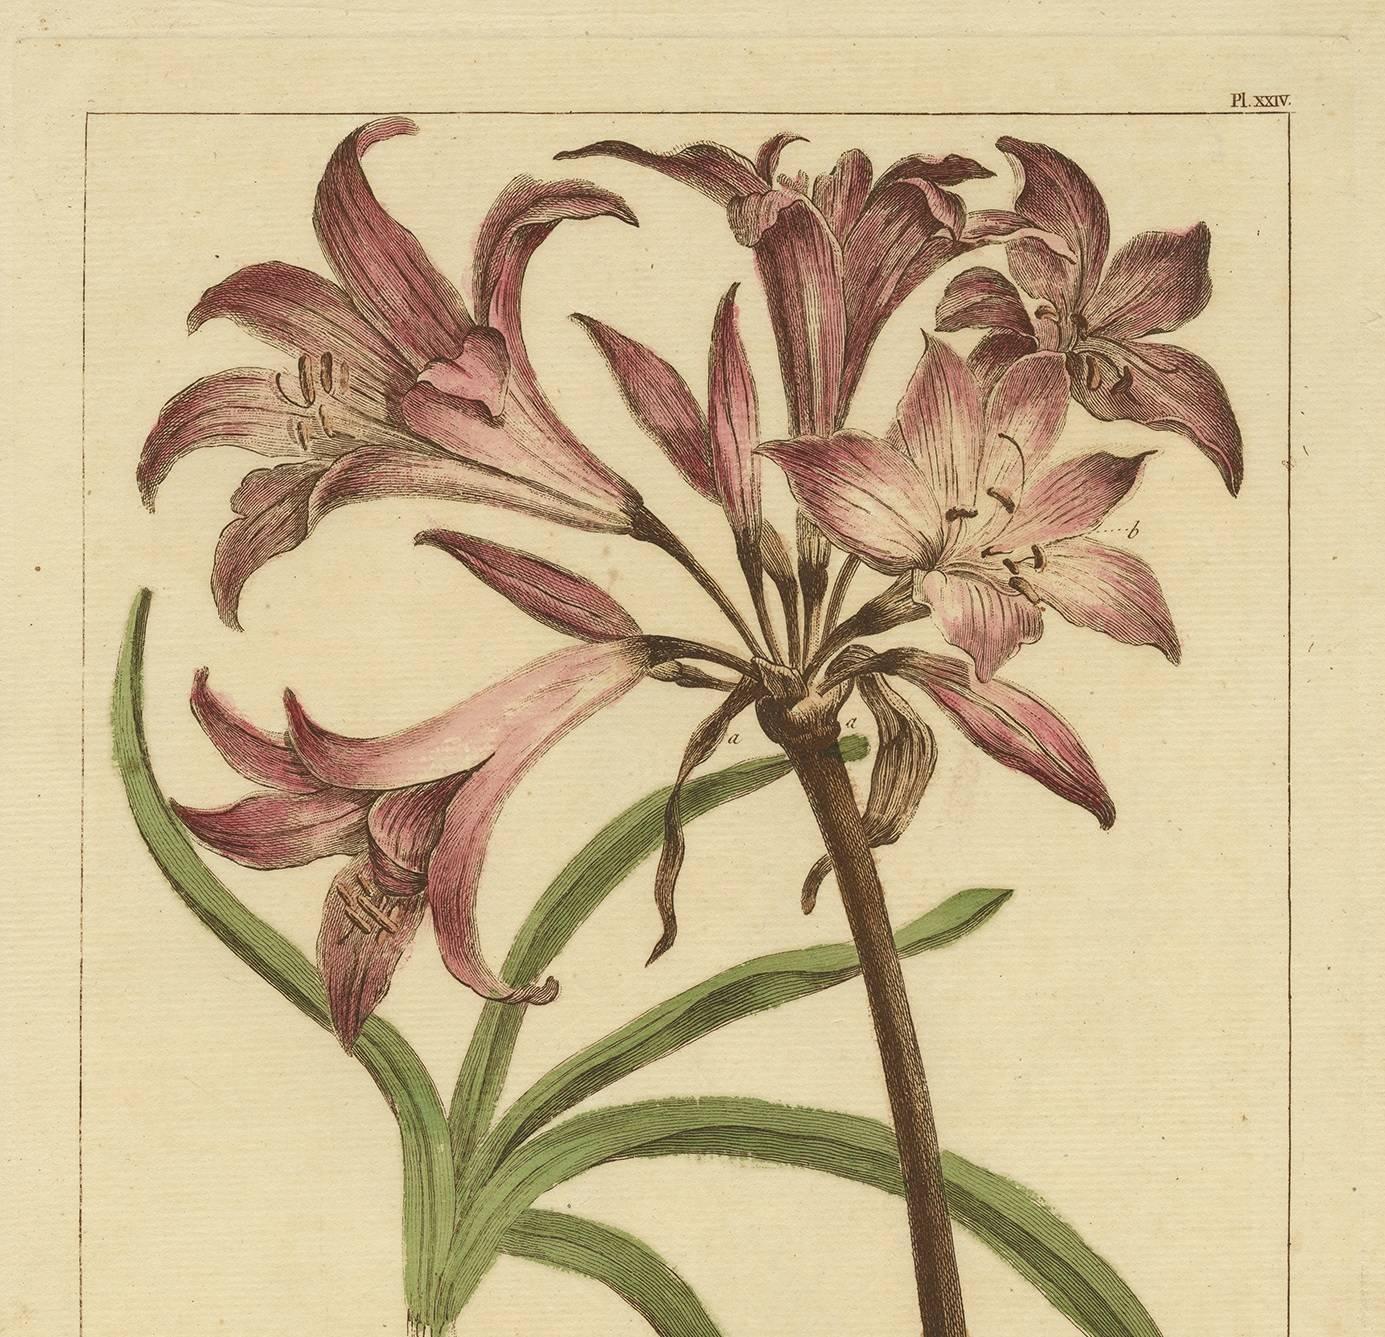 Plate XXIV 'Amaryllis', originates from 'Figures of the most beautiful, useful and uncommon plants described in the Gardener's Dictionary (..)' by P. Miller.

Philip Miller was the principal horticulturalist in England in the mid-18th century. As